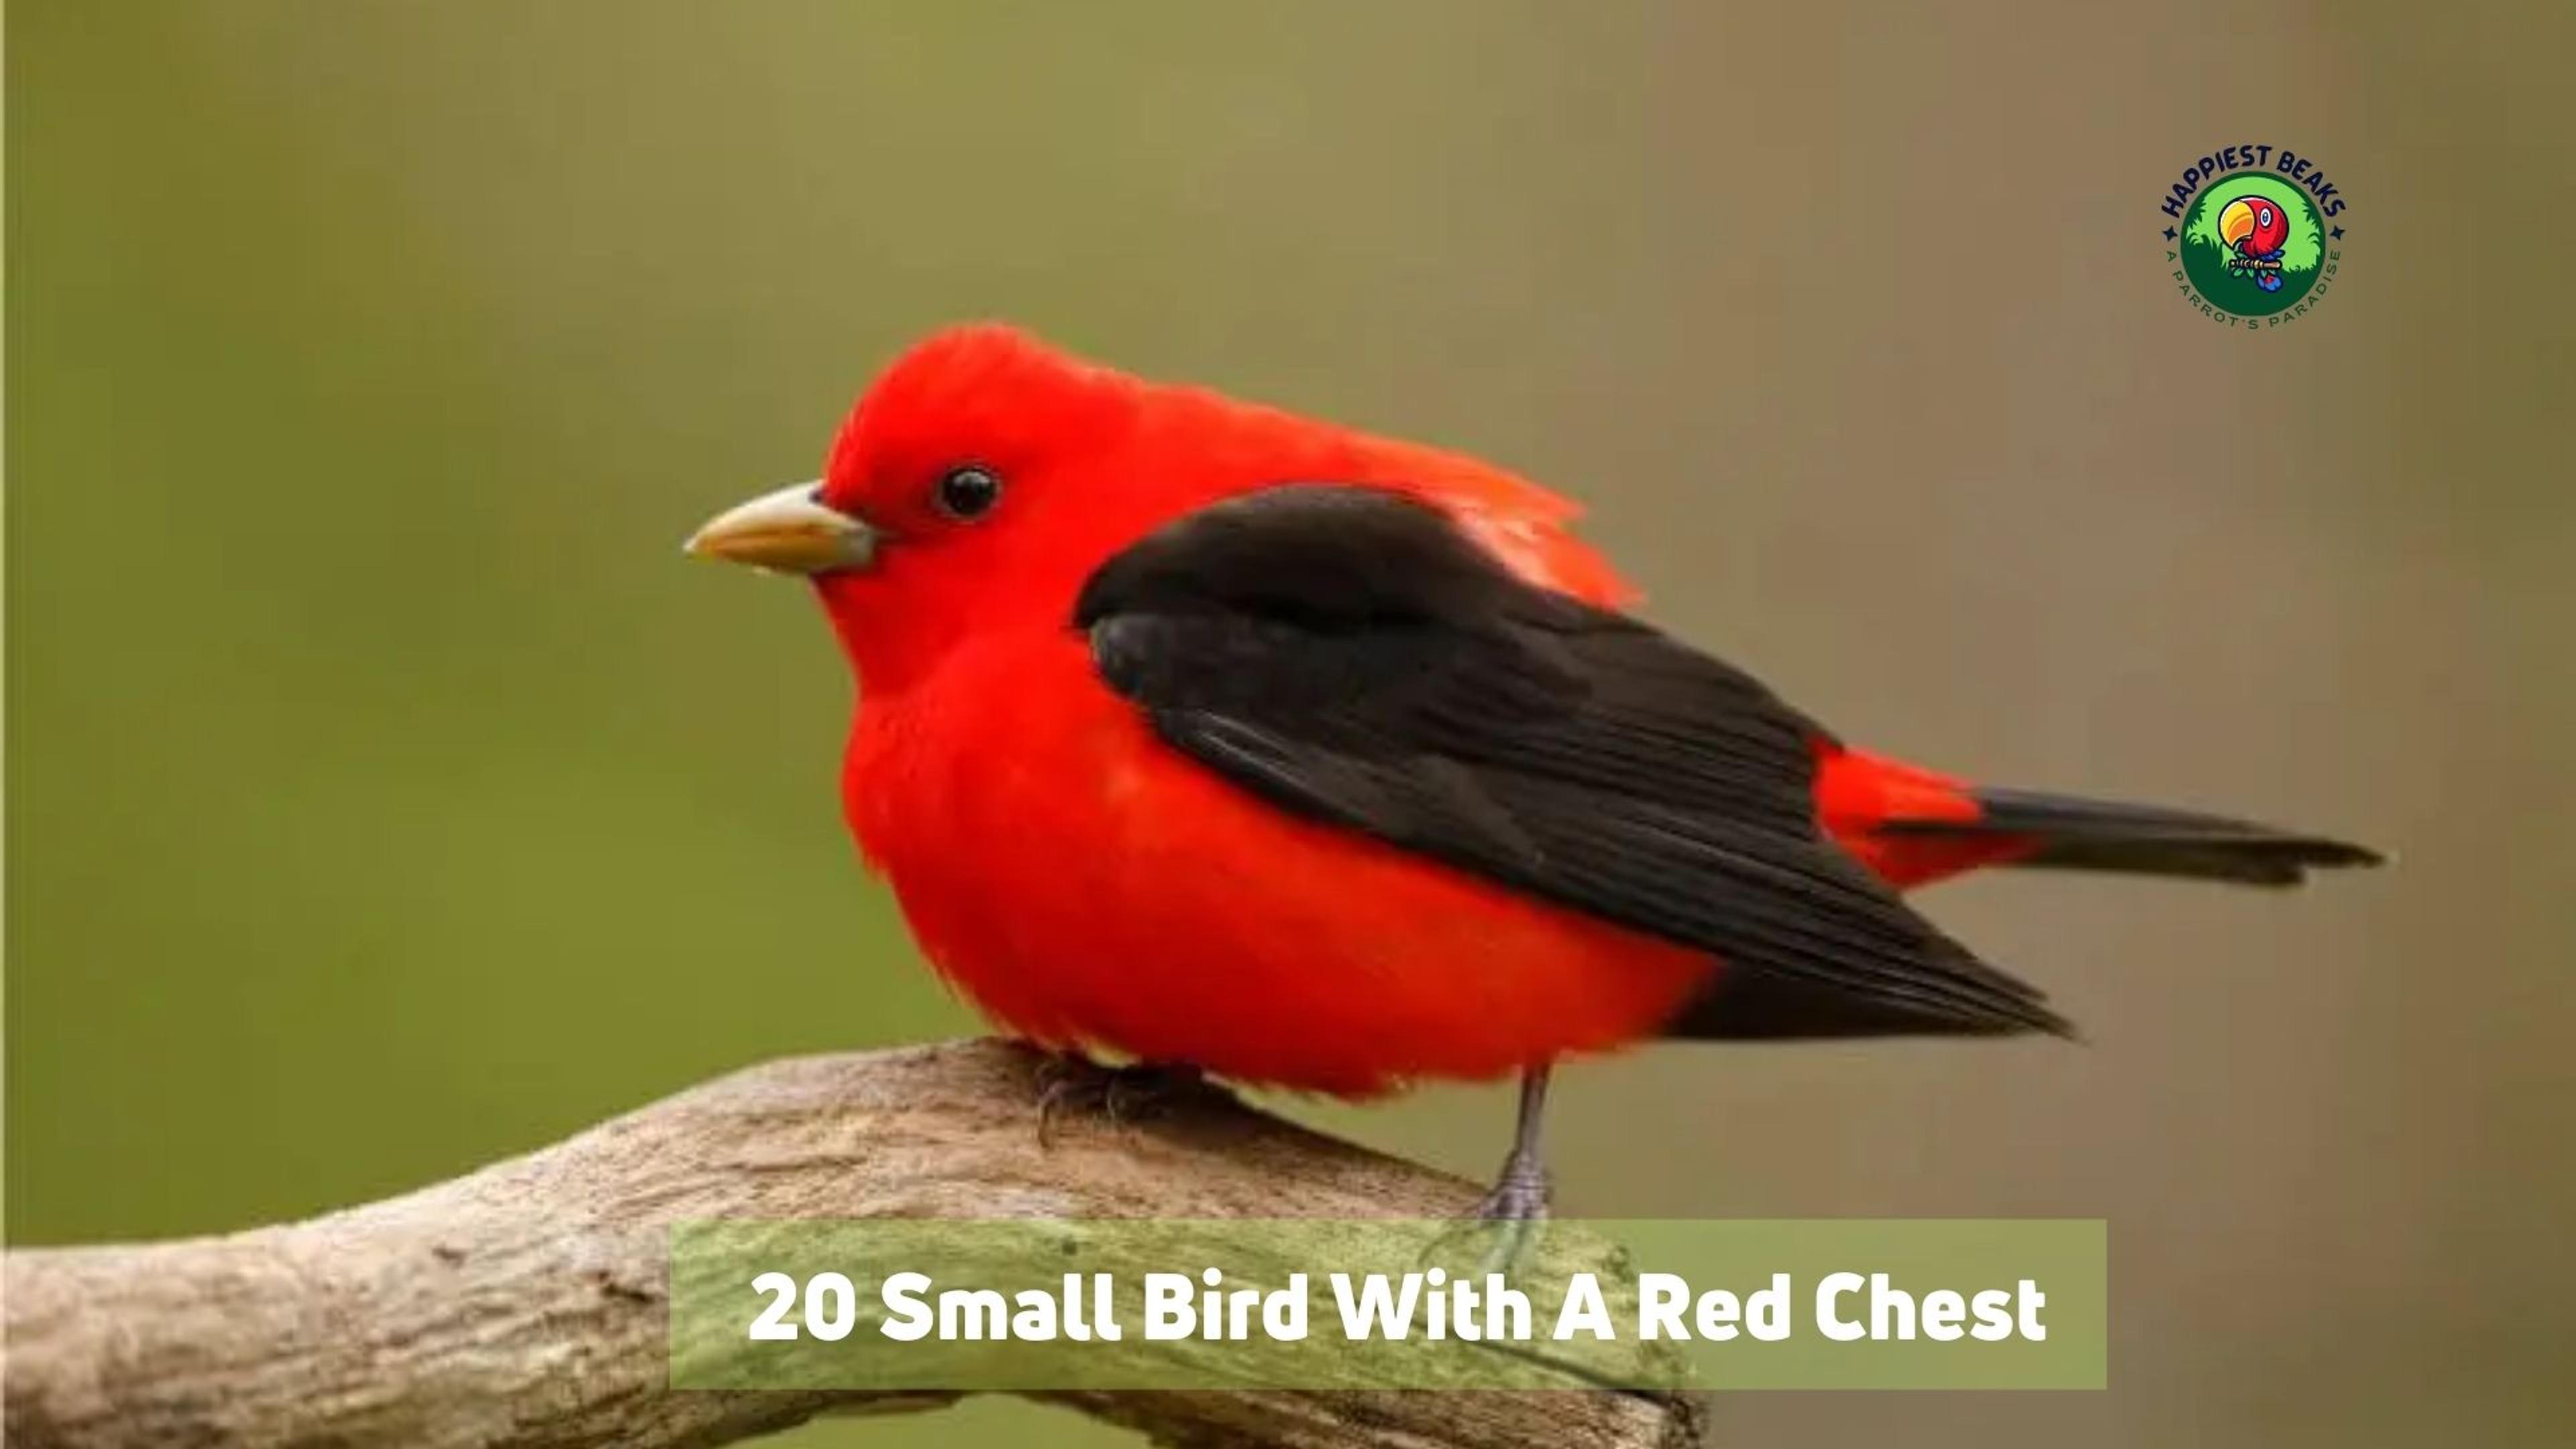 20 Small Bird With A Red Chest